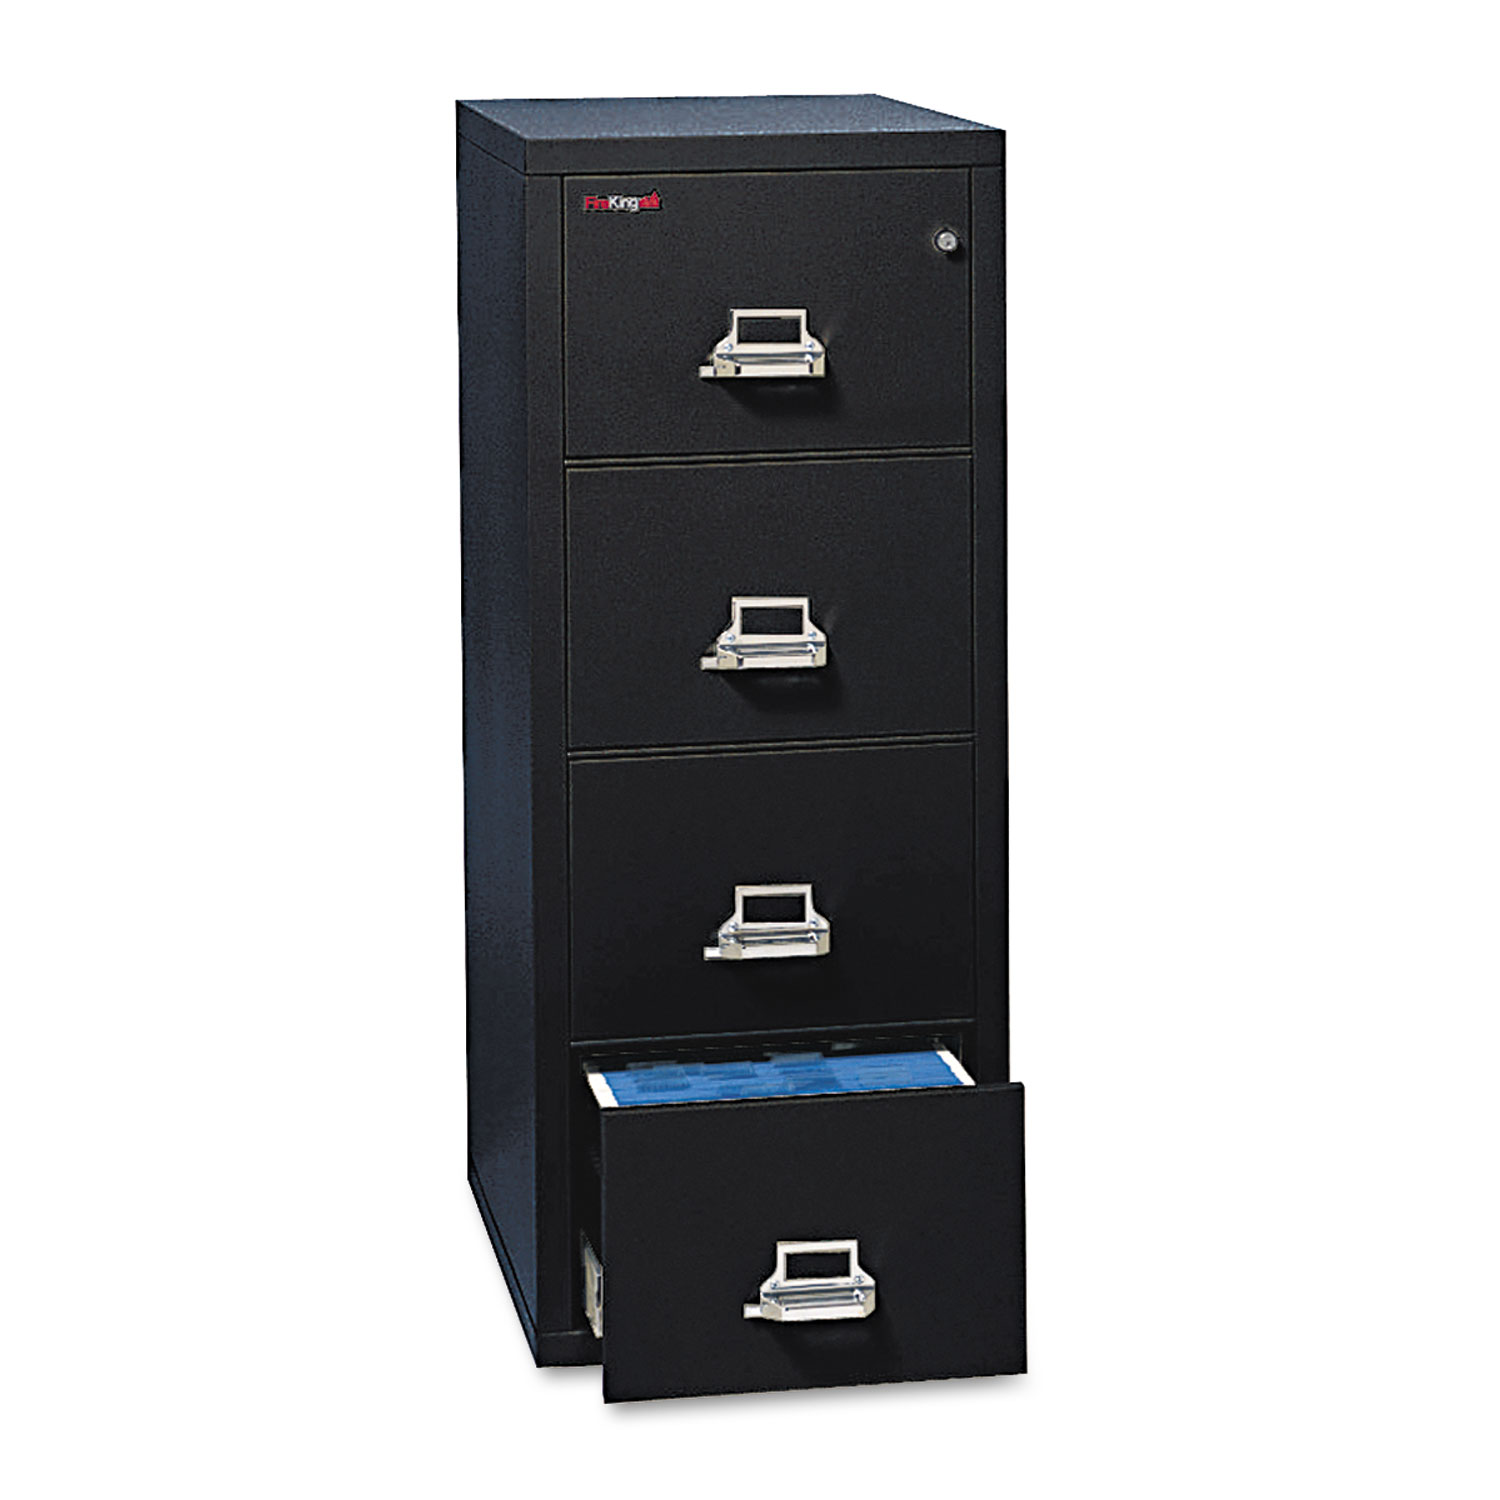 Four-Drawer Vertical File, 20 13/16w x 31 9/16d, UL 350 for Fire, Legal, Black